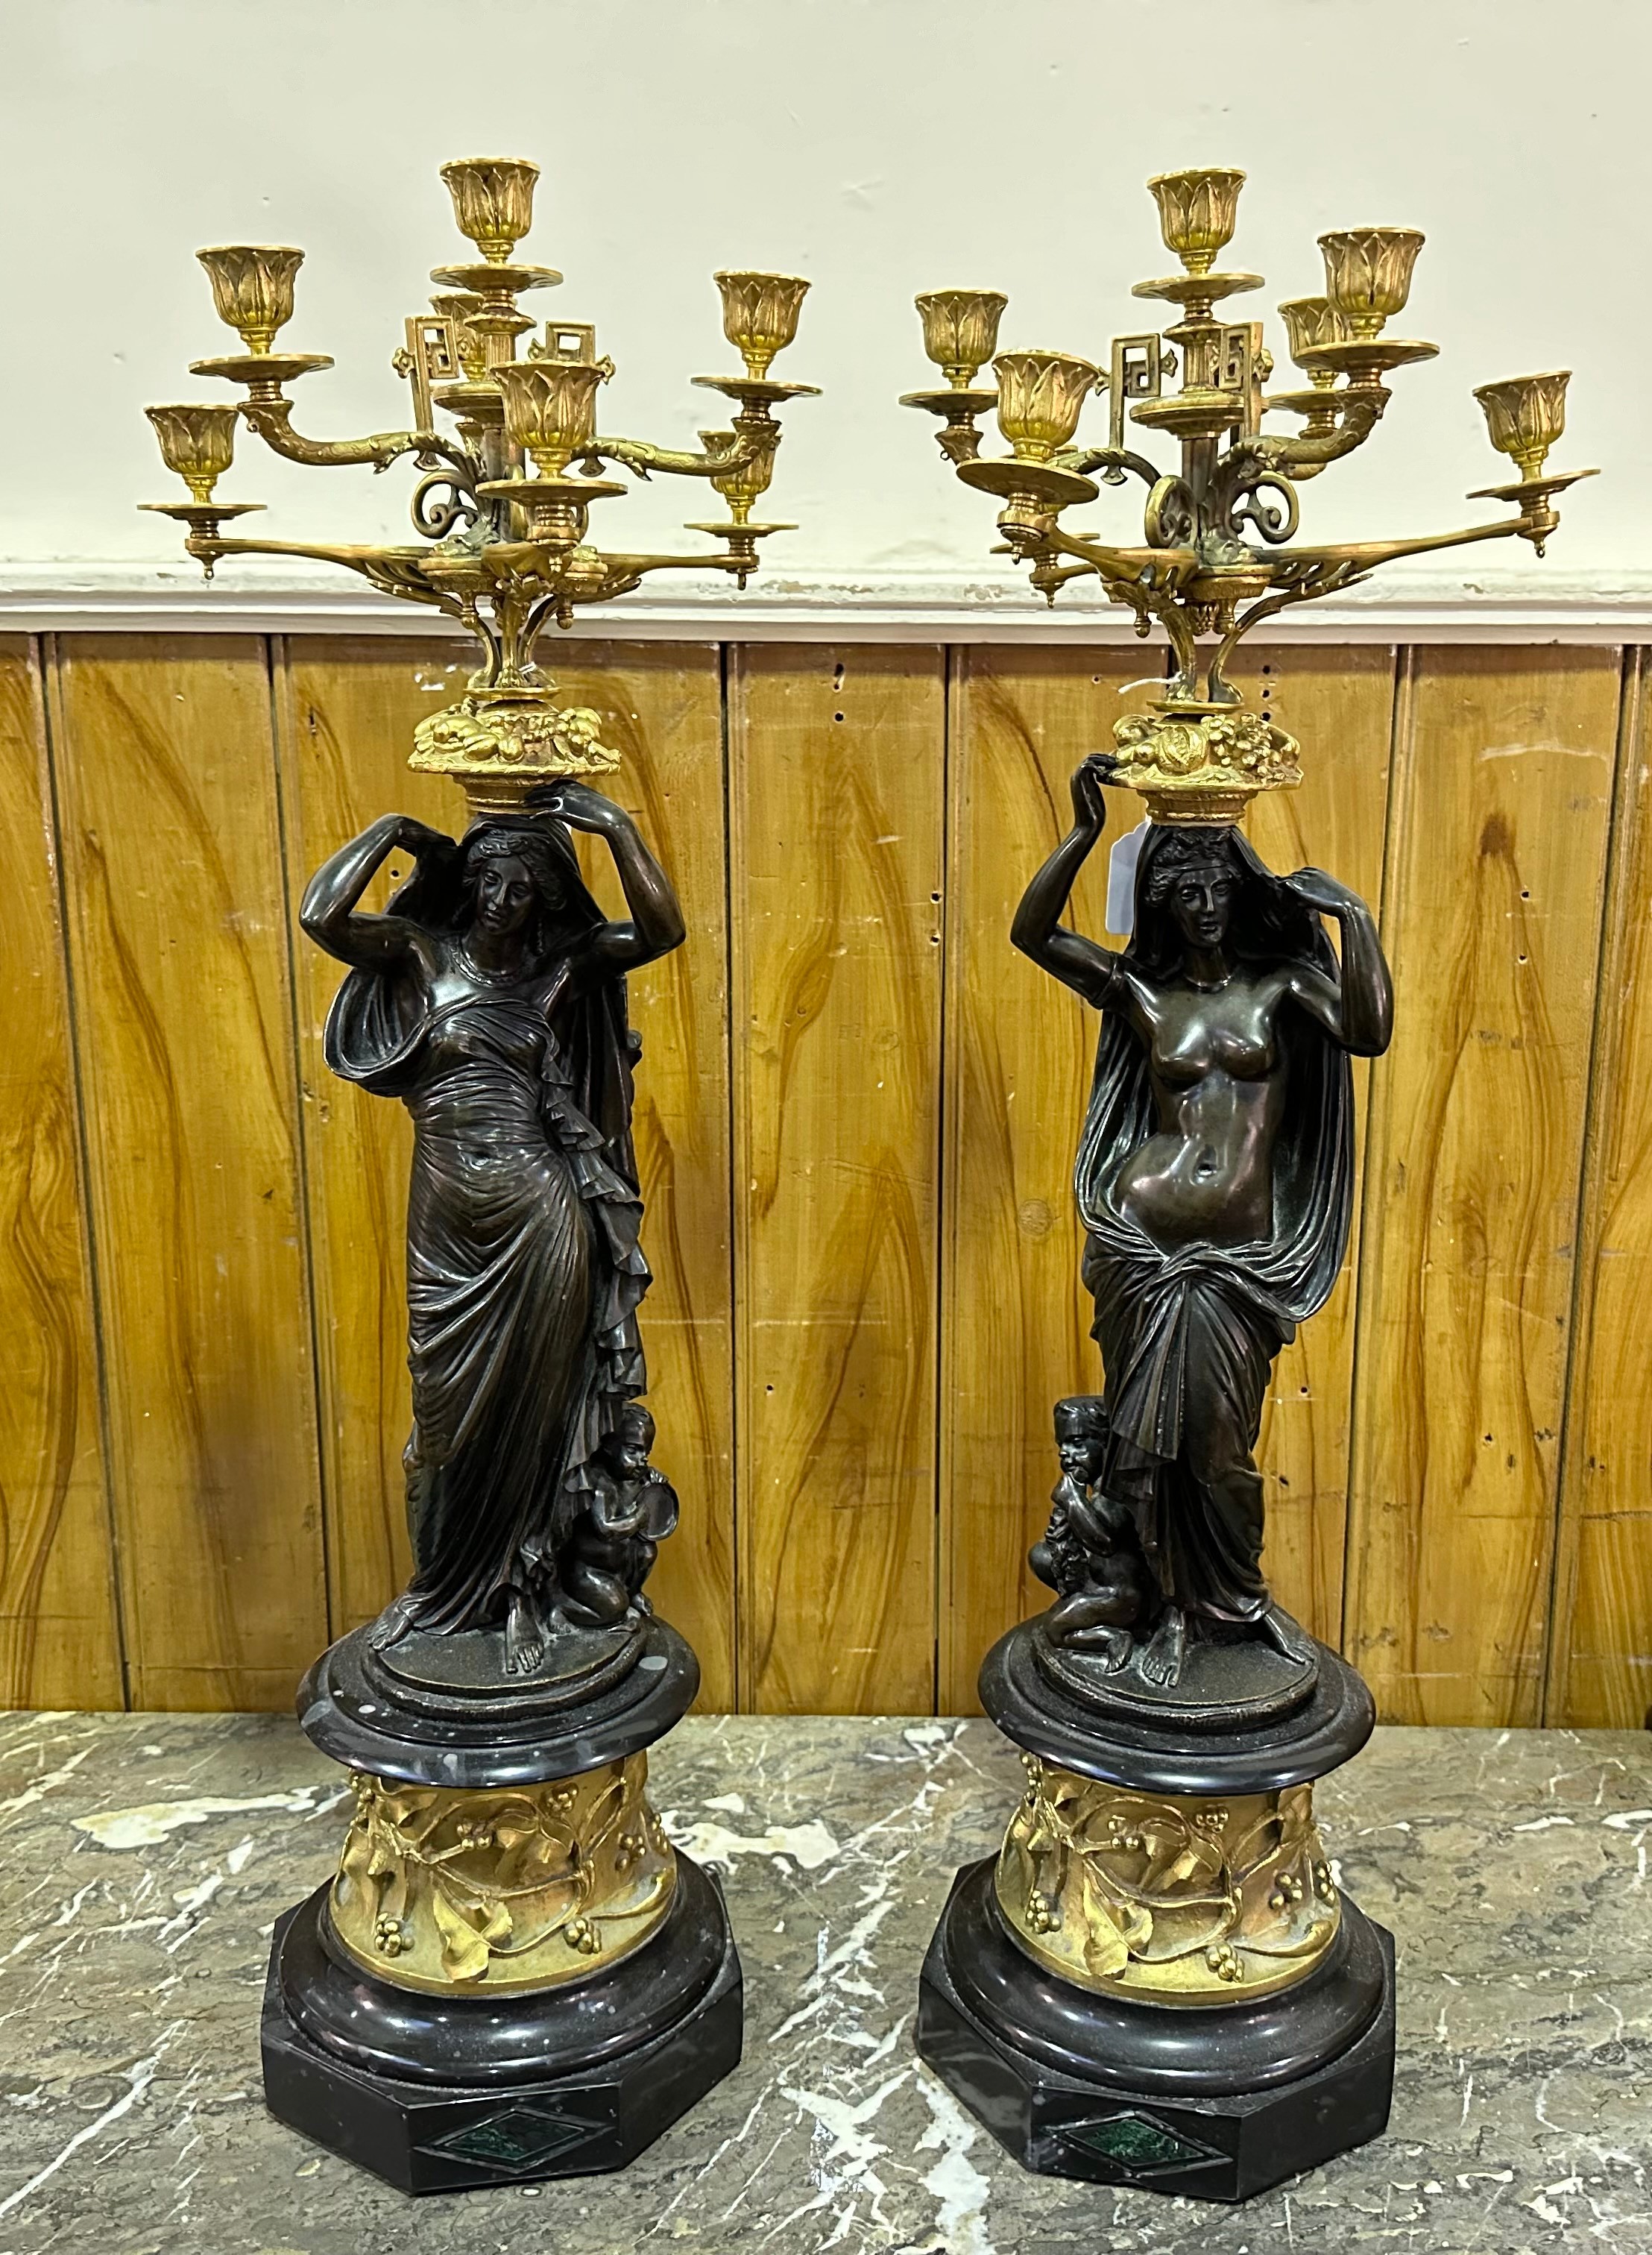 A pair of bronze and ormolu figural seven-light candelabra, each cast with a classical maiden